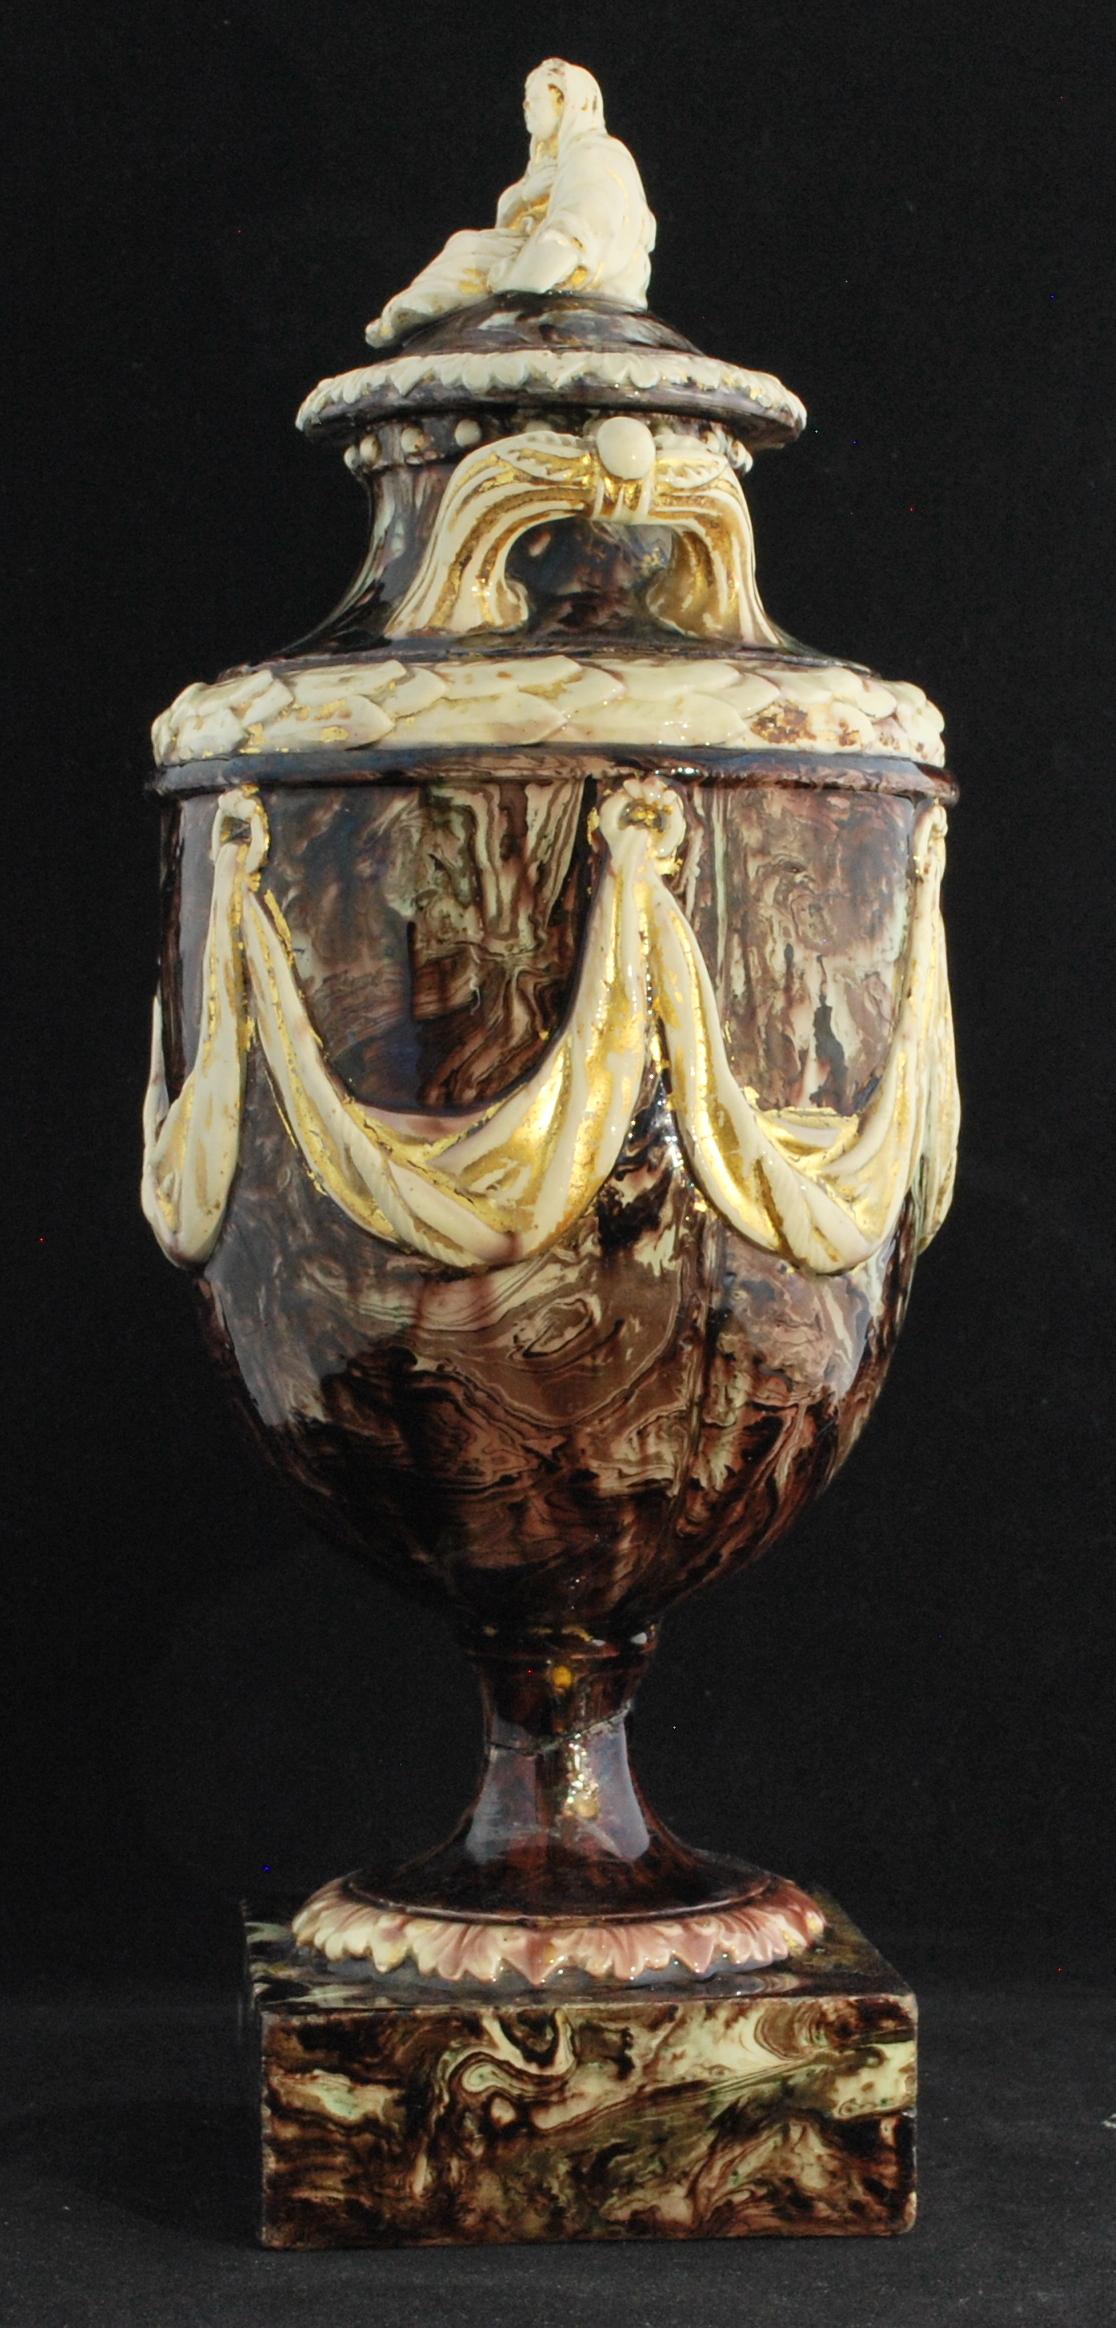 Attributed to Simon Heinrich Steitz. A rare example of a solid agateware vase.